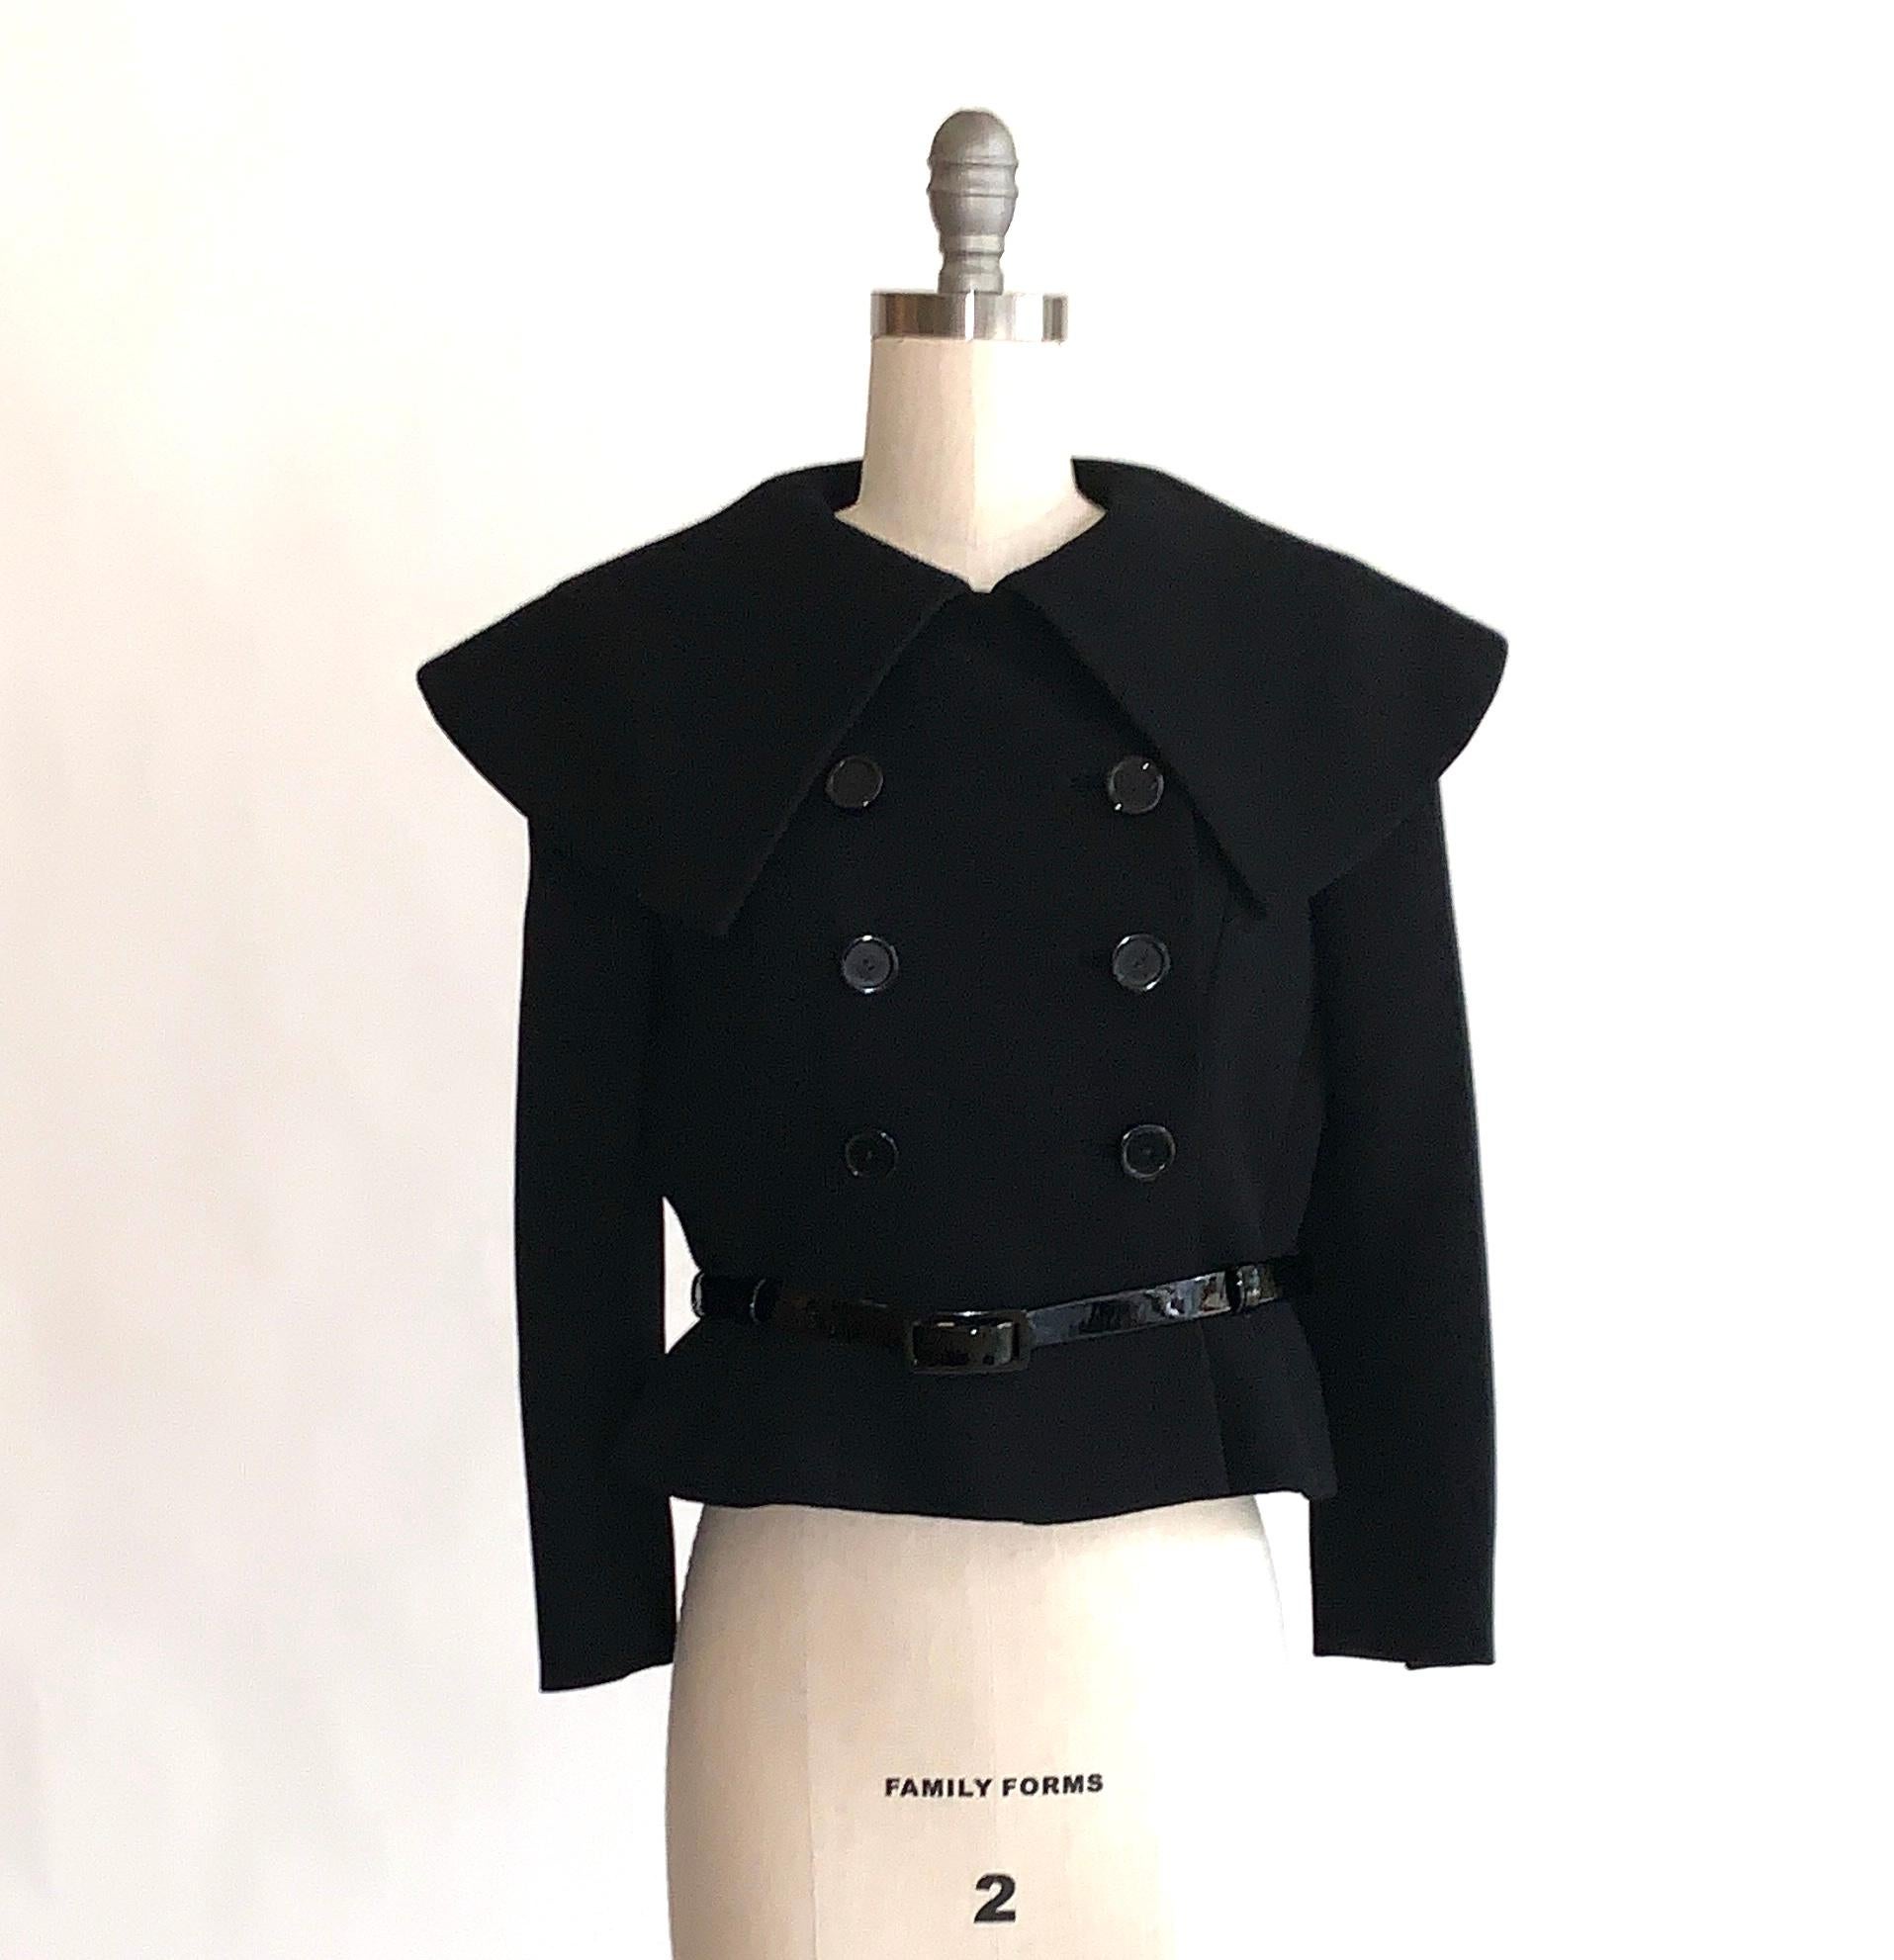 Norman Norell 1960s black belted jacket with oversize pilgrim collar, princess seams, and double breasted button front. Six large plastic buttons at front and three smaller buttons at each cuff. Three belt loops at waist hold a thin patent leather